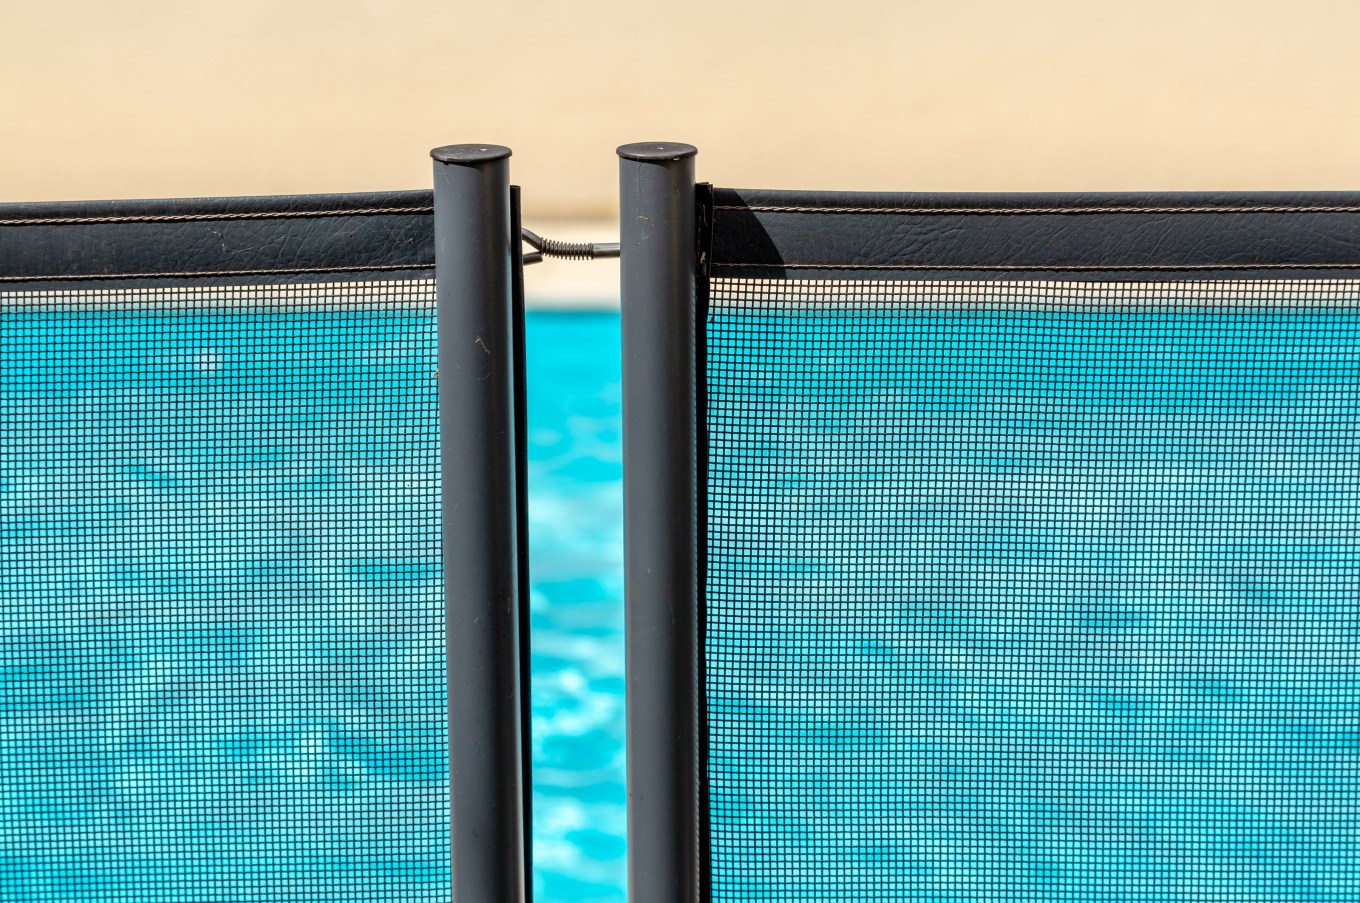 View of a pool through a dark, mesh safety net.